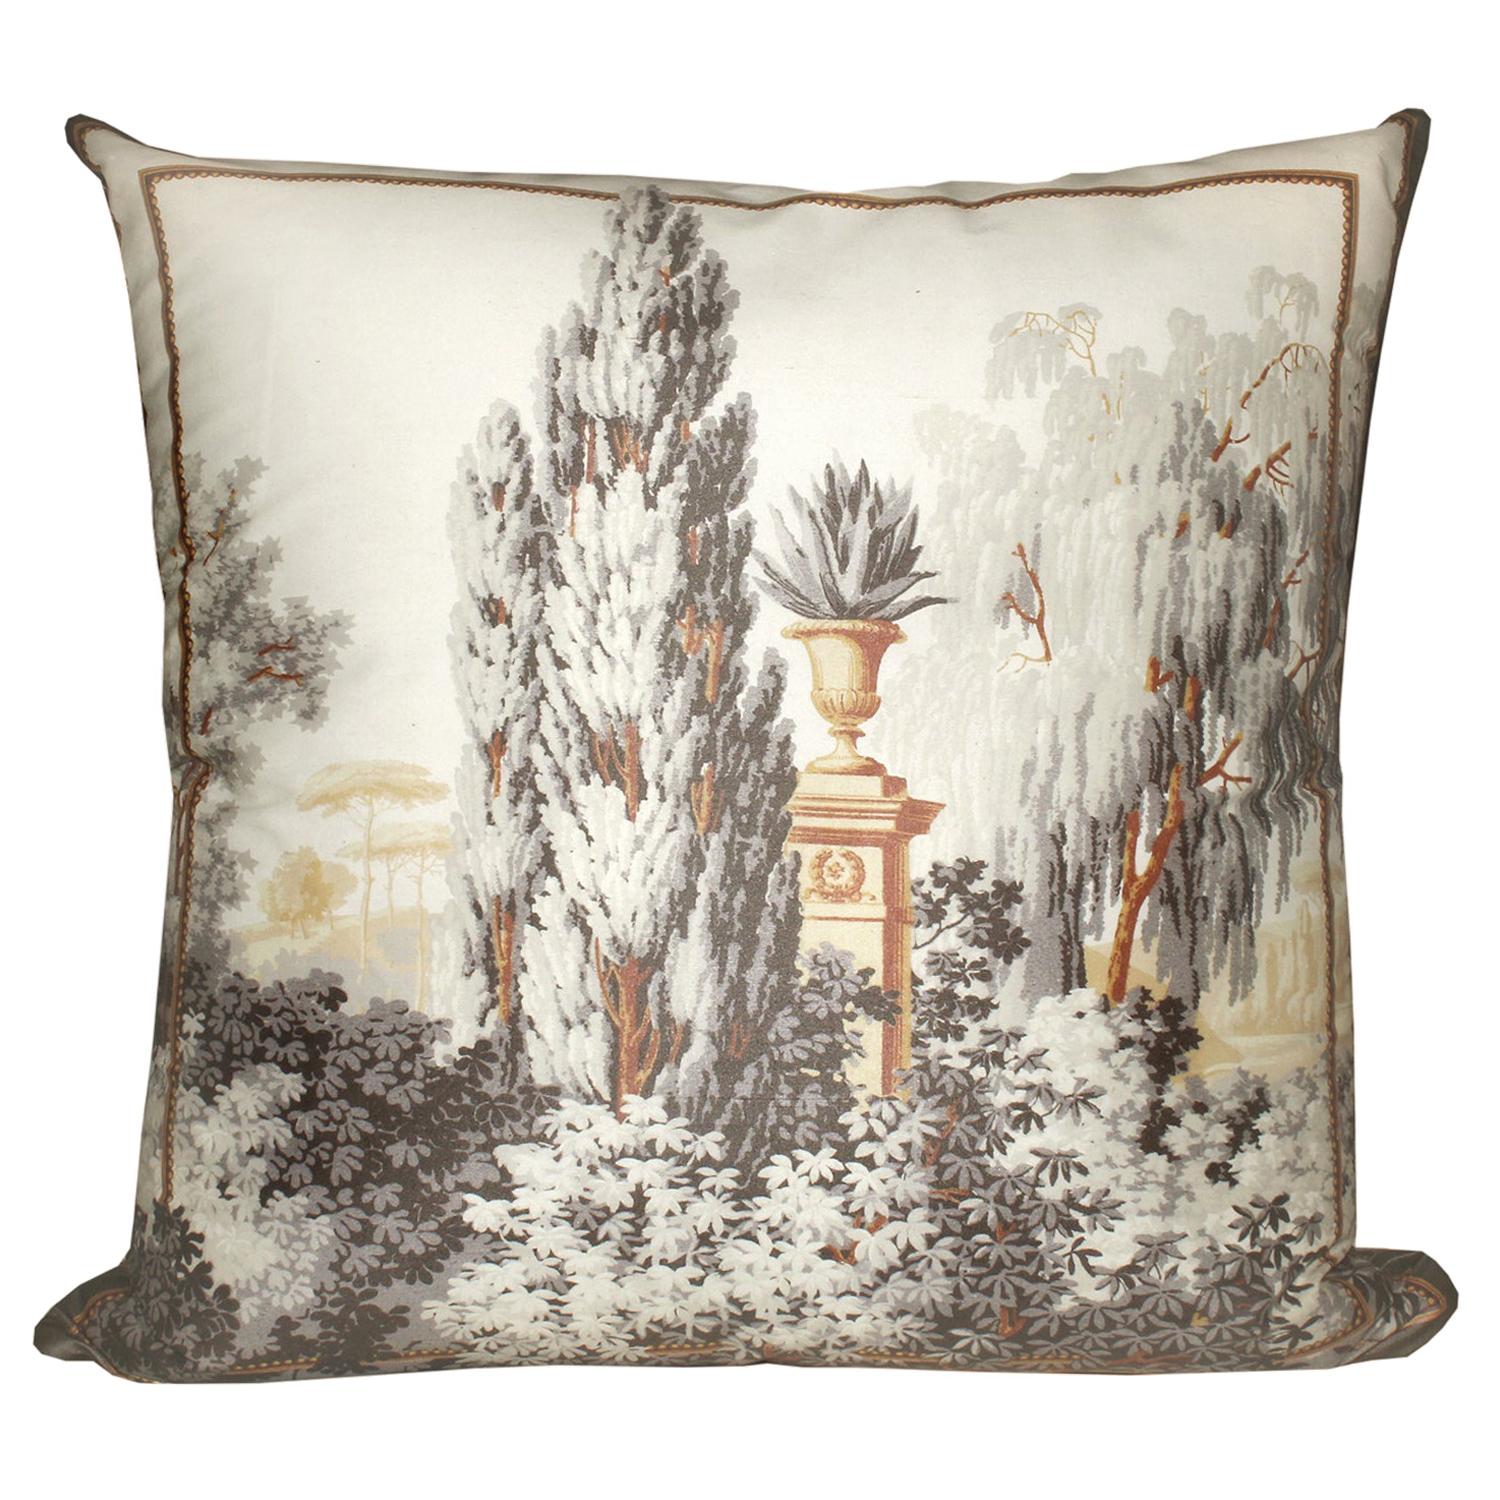 Les Lointains Silk Throw Pillow in Gray by Zuber For Sale